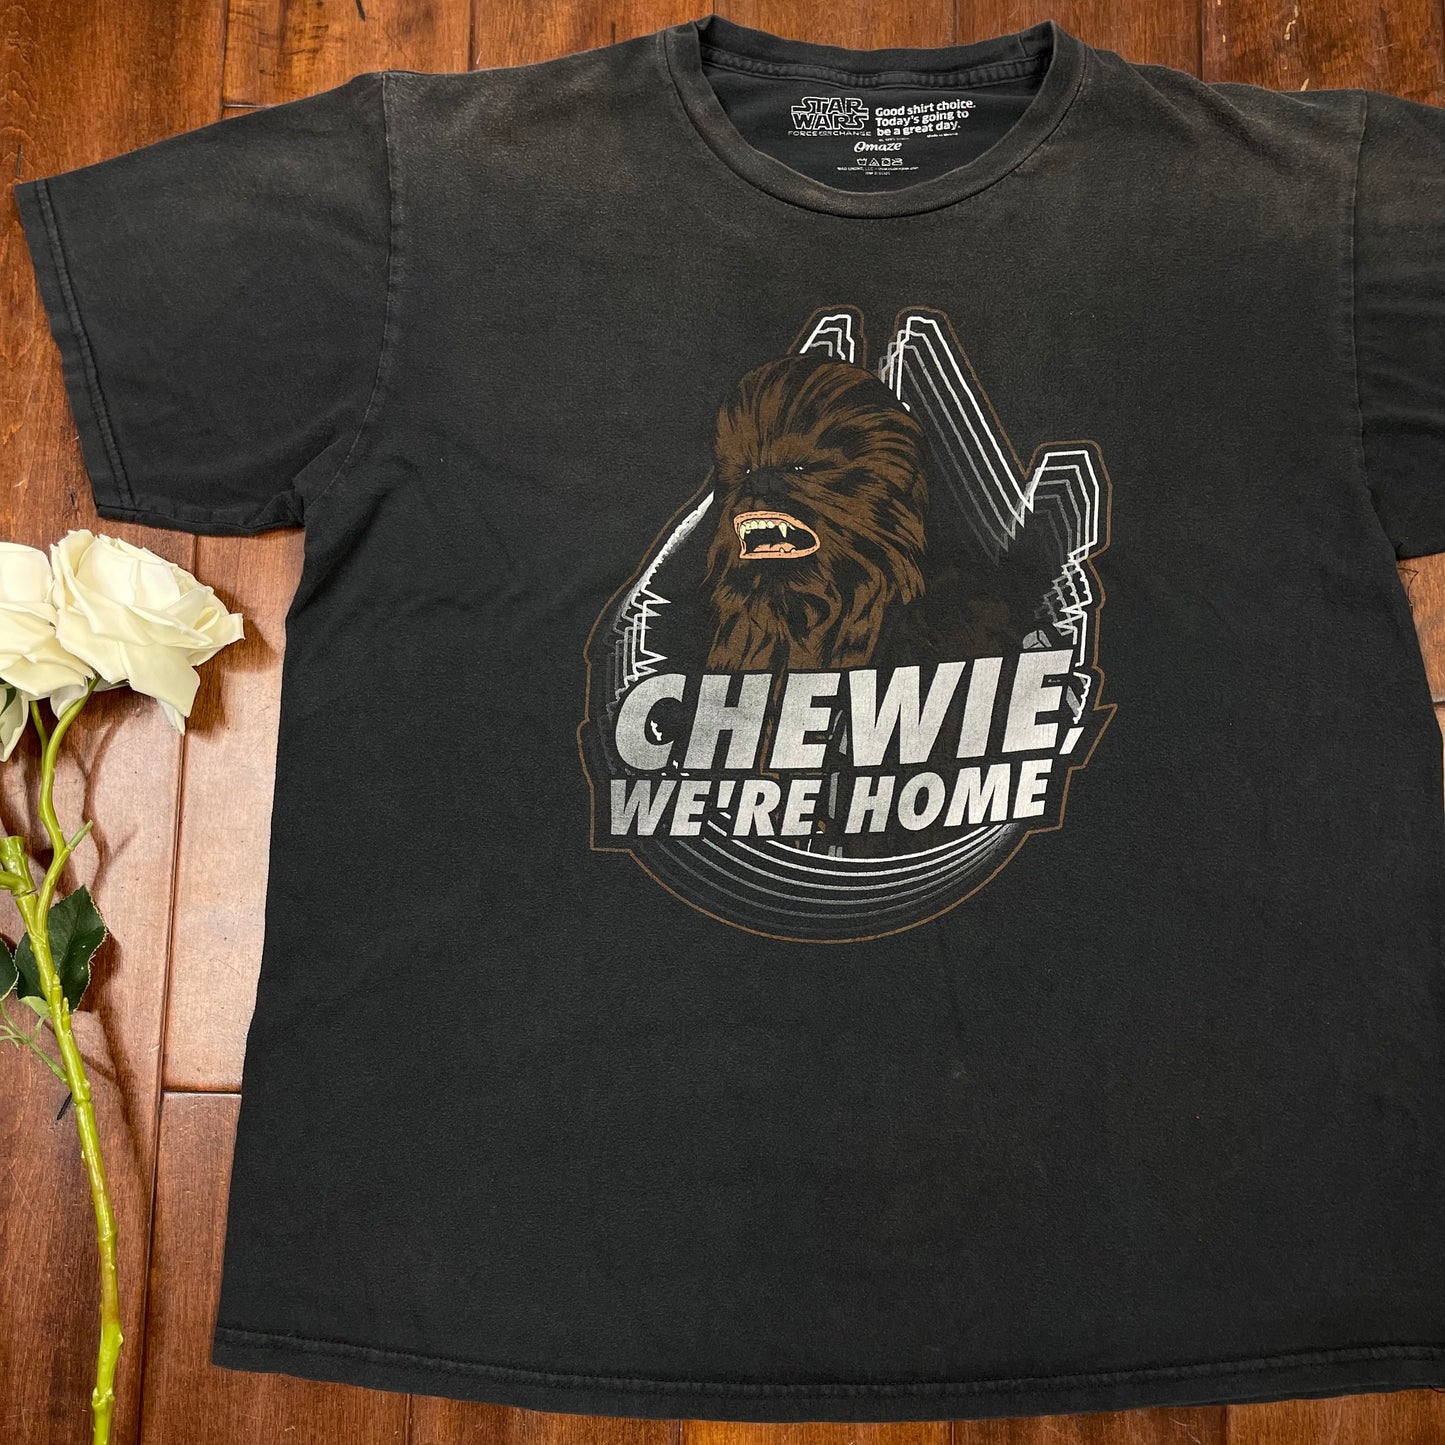 THRIFTED “CHEWIE WE’RE HOME” T-SHIRT